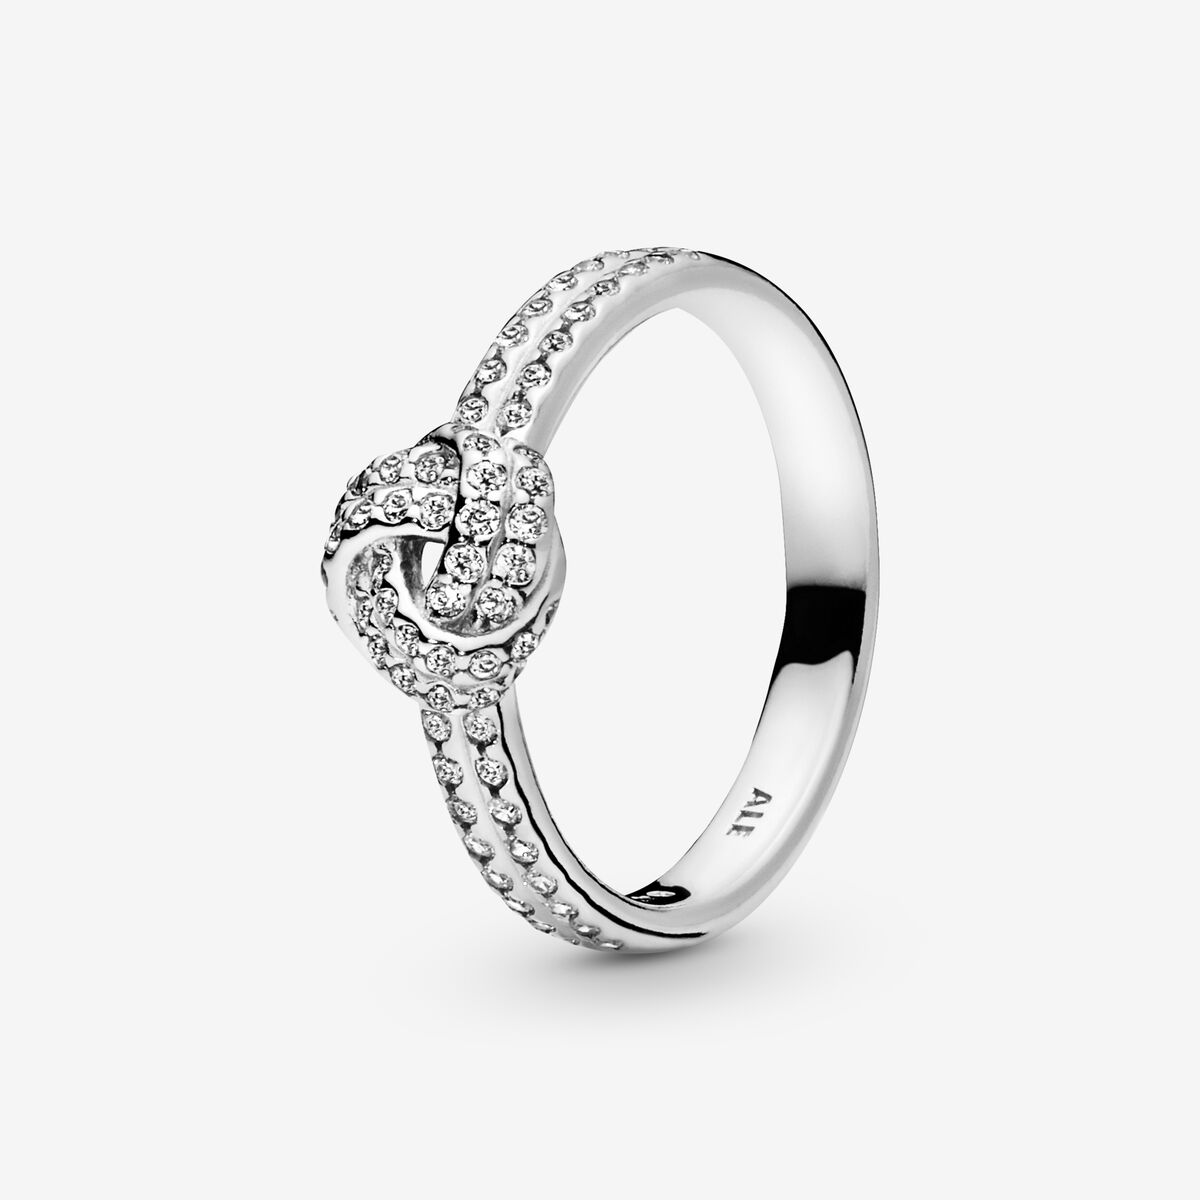 Sparkling Love Knot Ring with Cubic Zirconia | Sterling silver | Pandora US